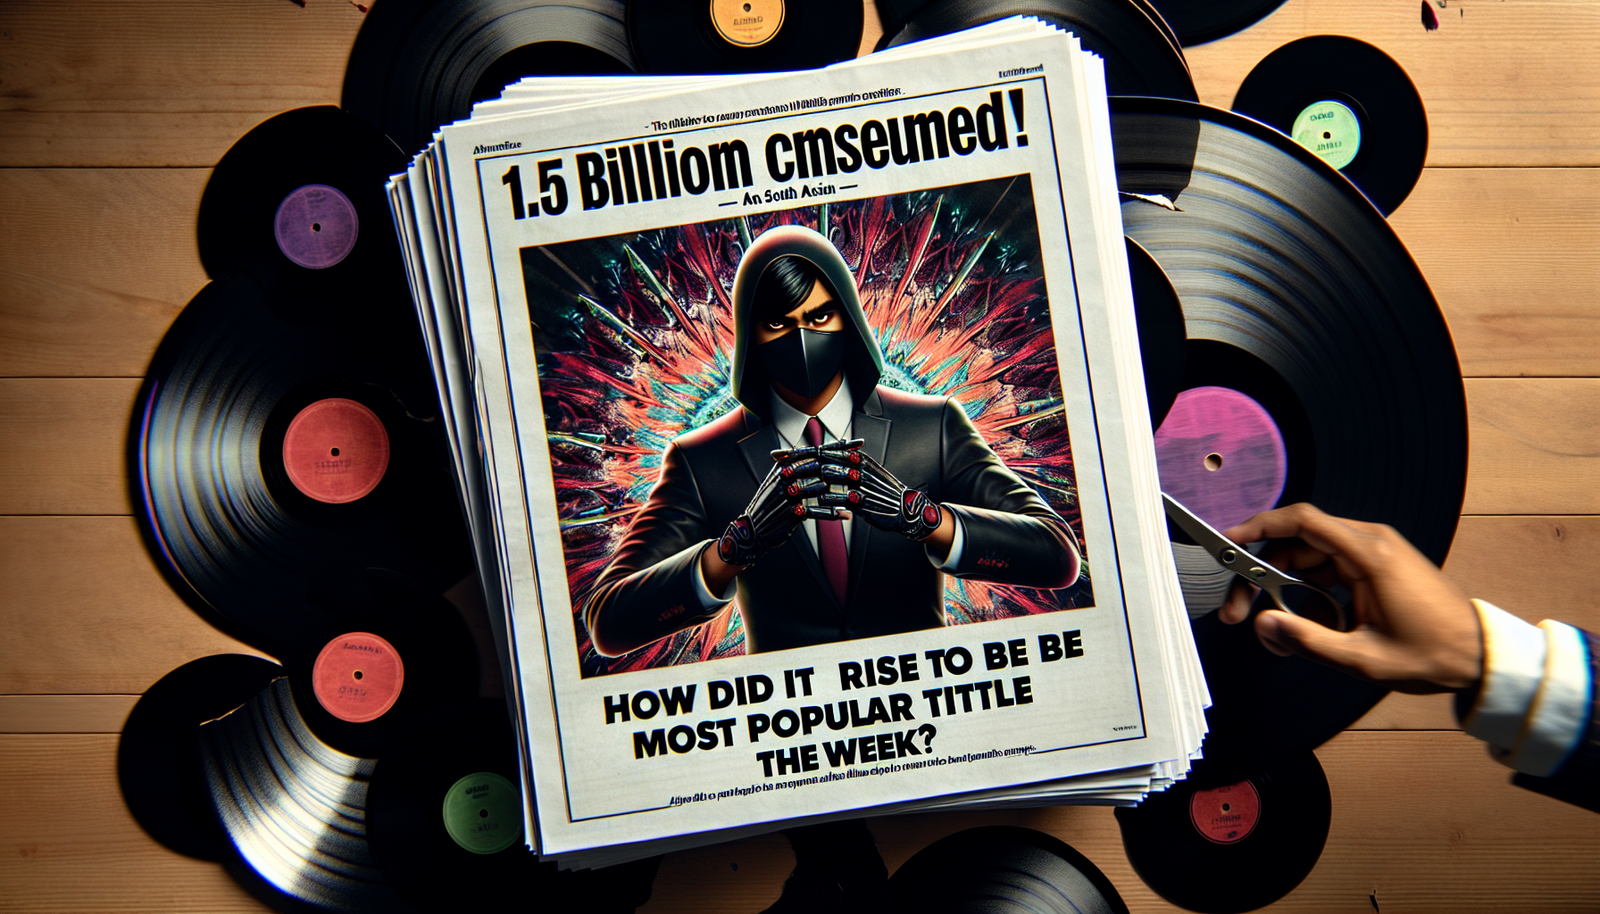 discover if 'hit man' broke all records and became the biggest title of the week with 1.5 billion minutes watched.